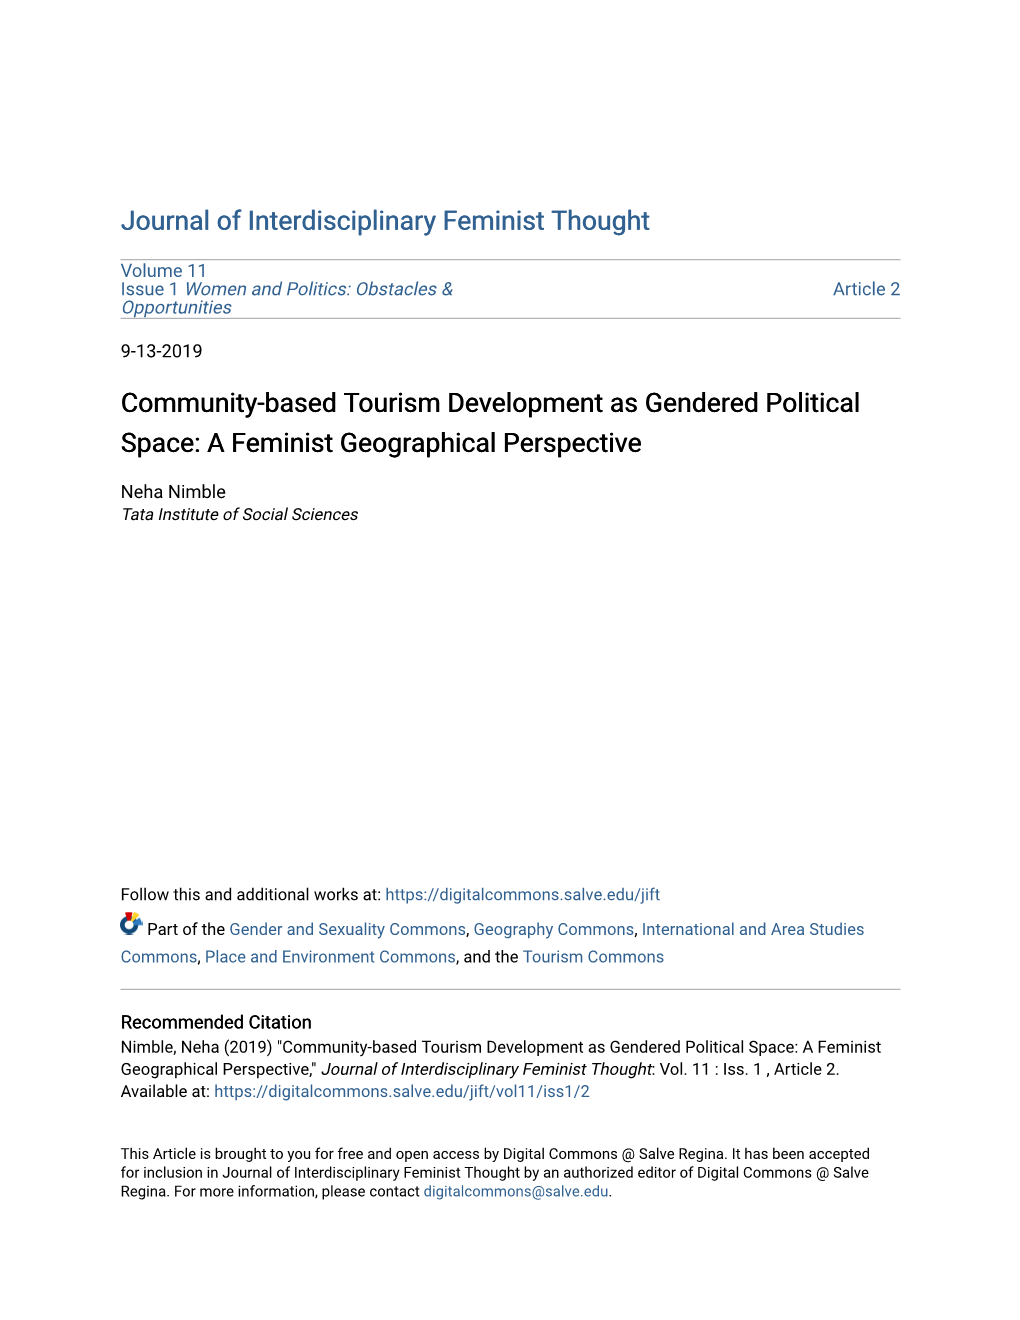 Community-Based Tourism Development As Gendered Political Space: a Feminist Geographical Perspective